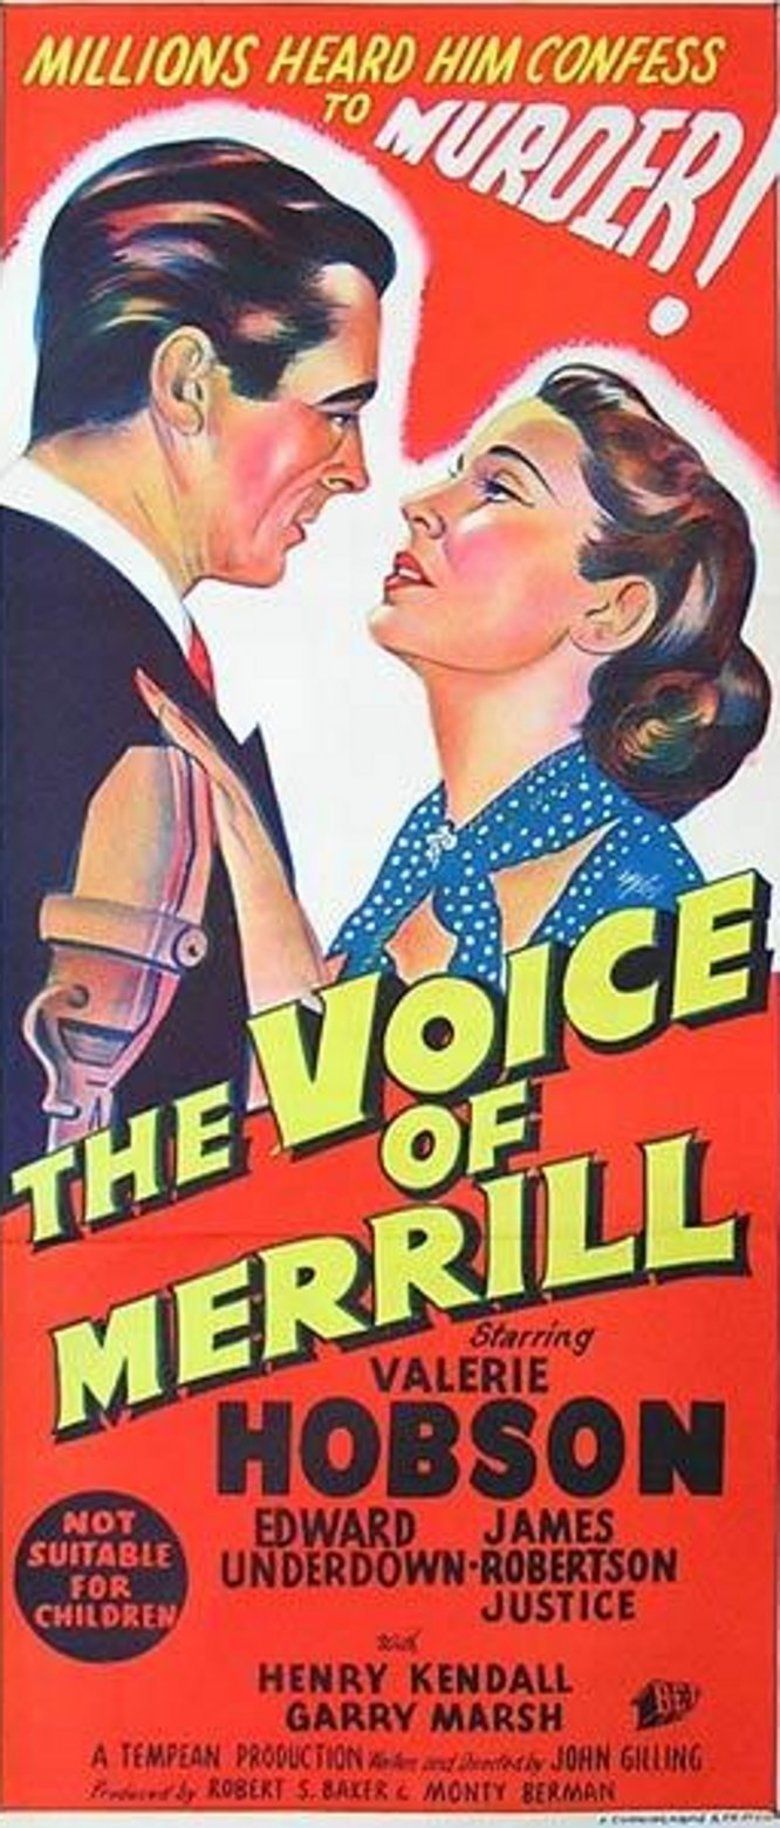 The Voice of Merrill movie poster